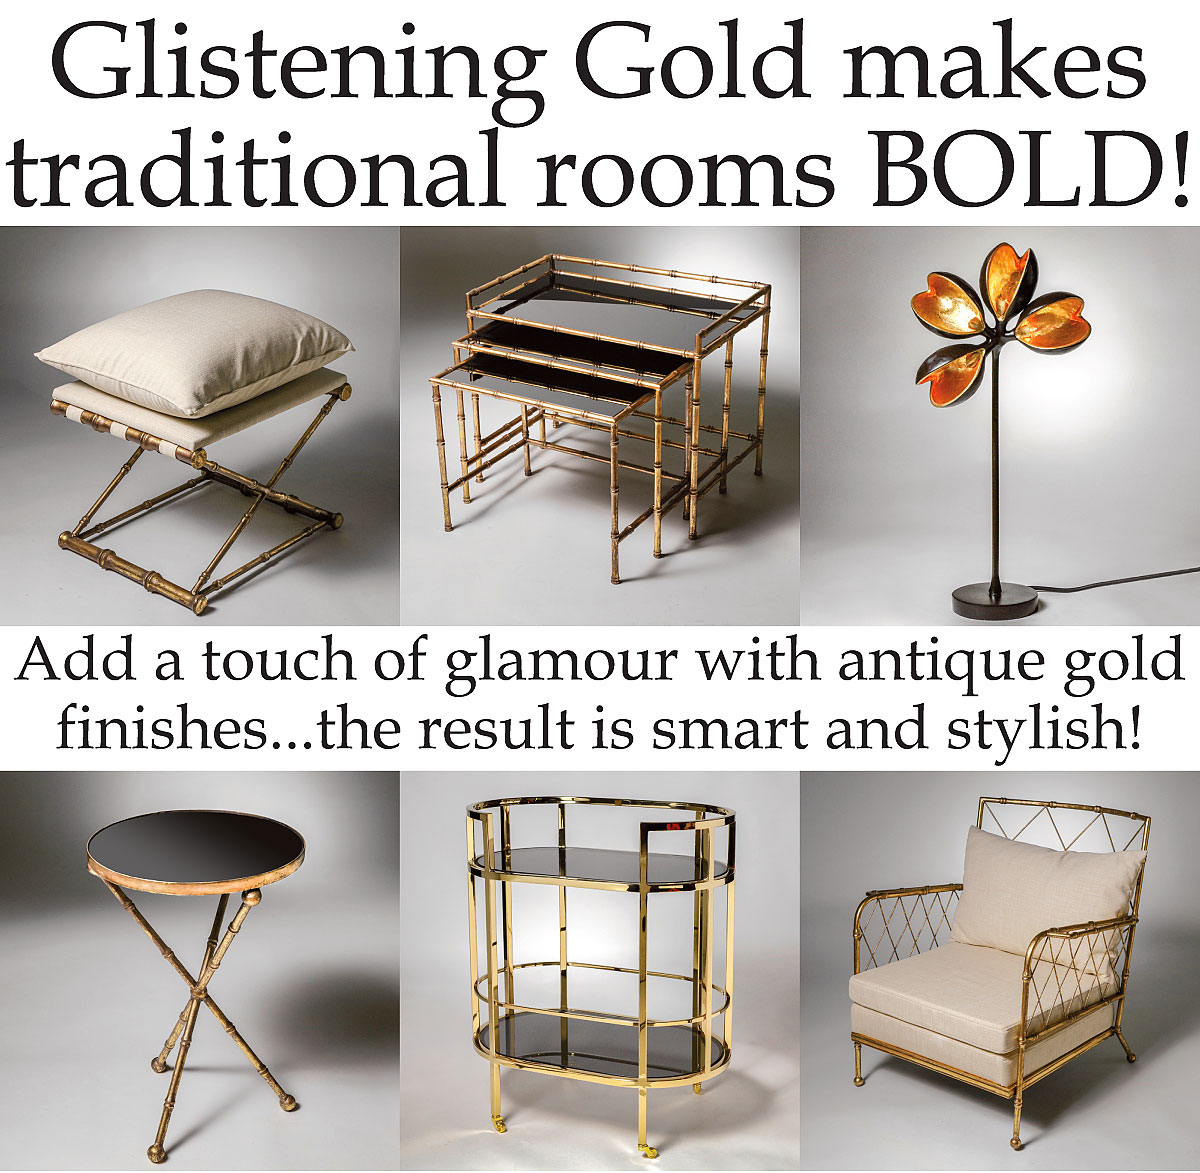 Glistening Gold makes traditional rooms BOLD!